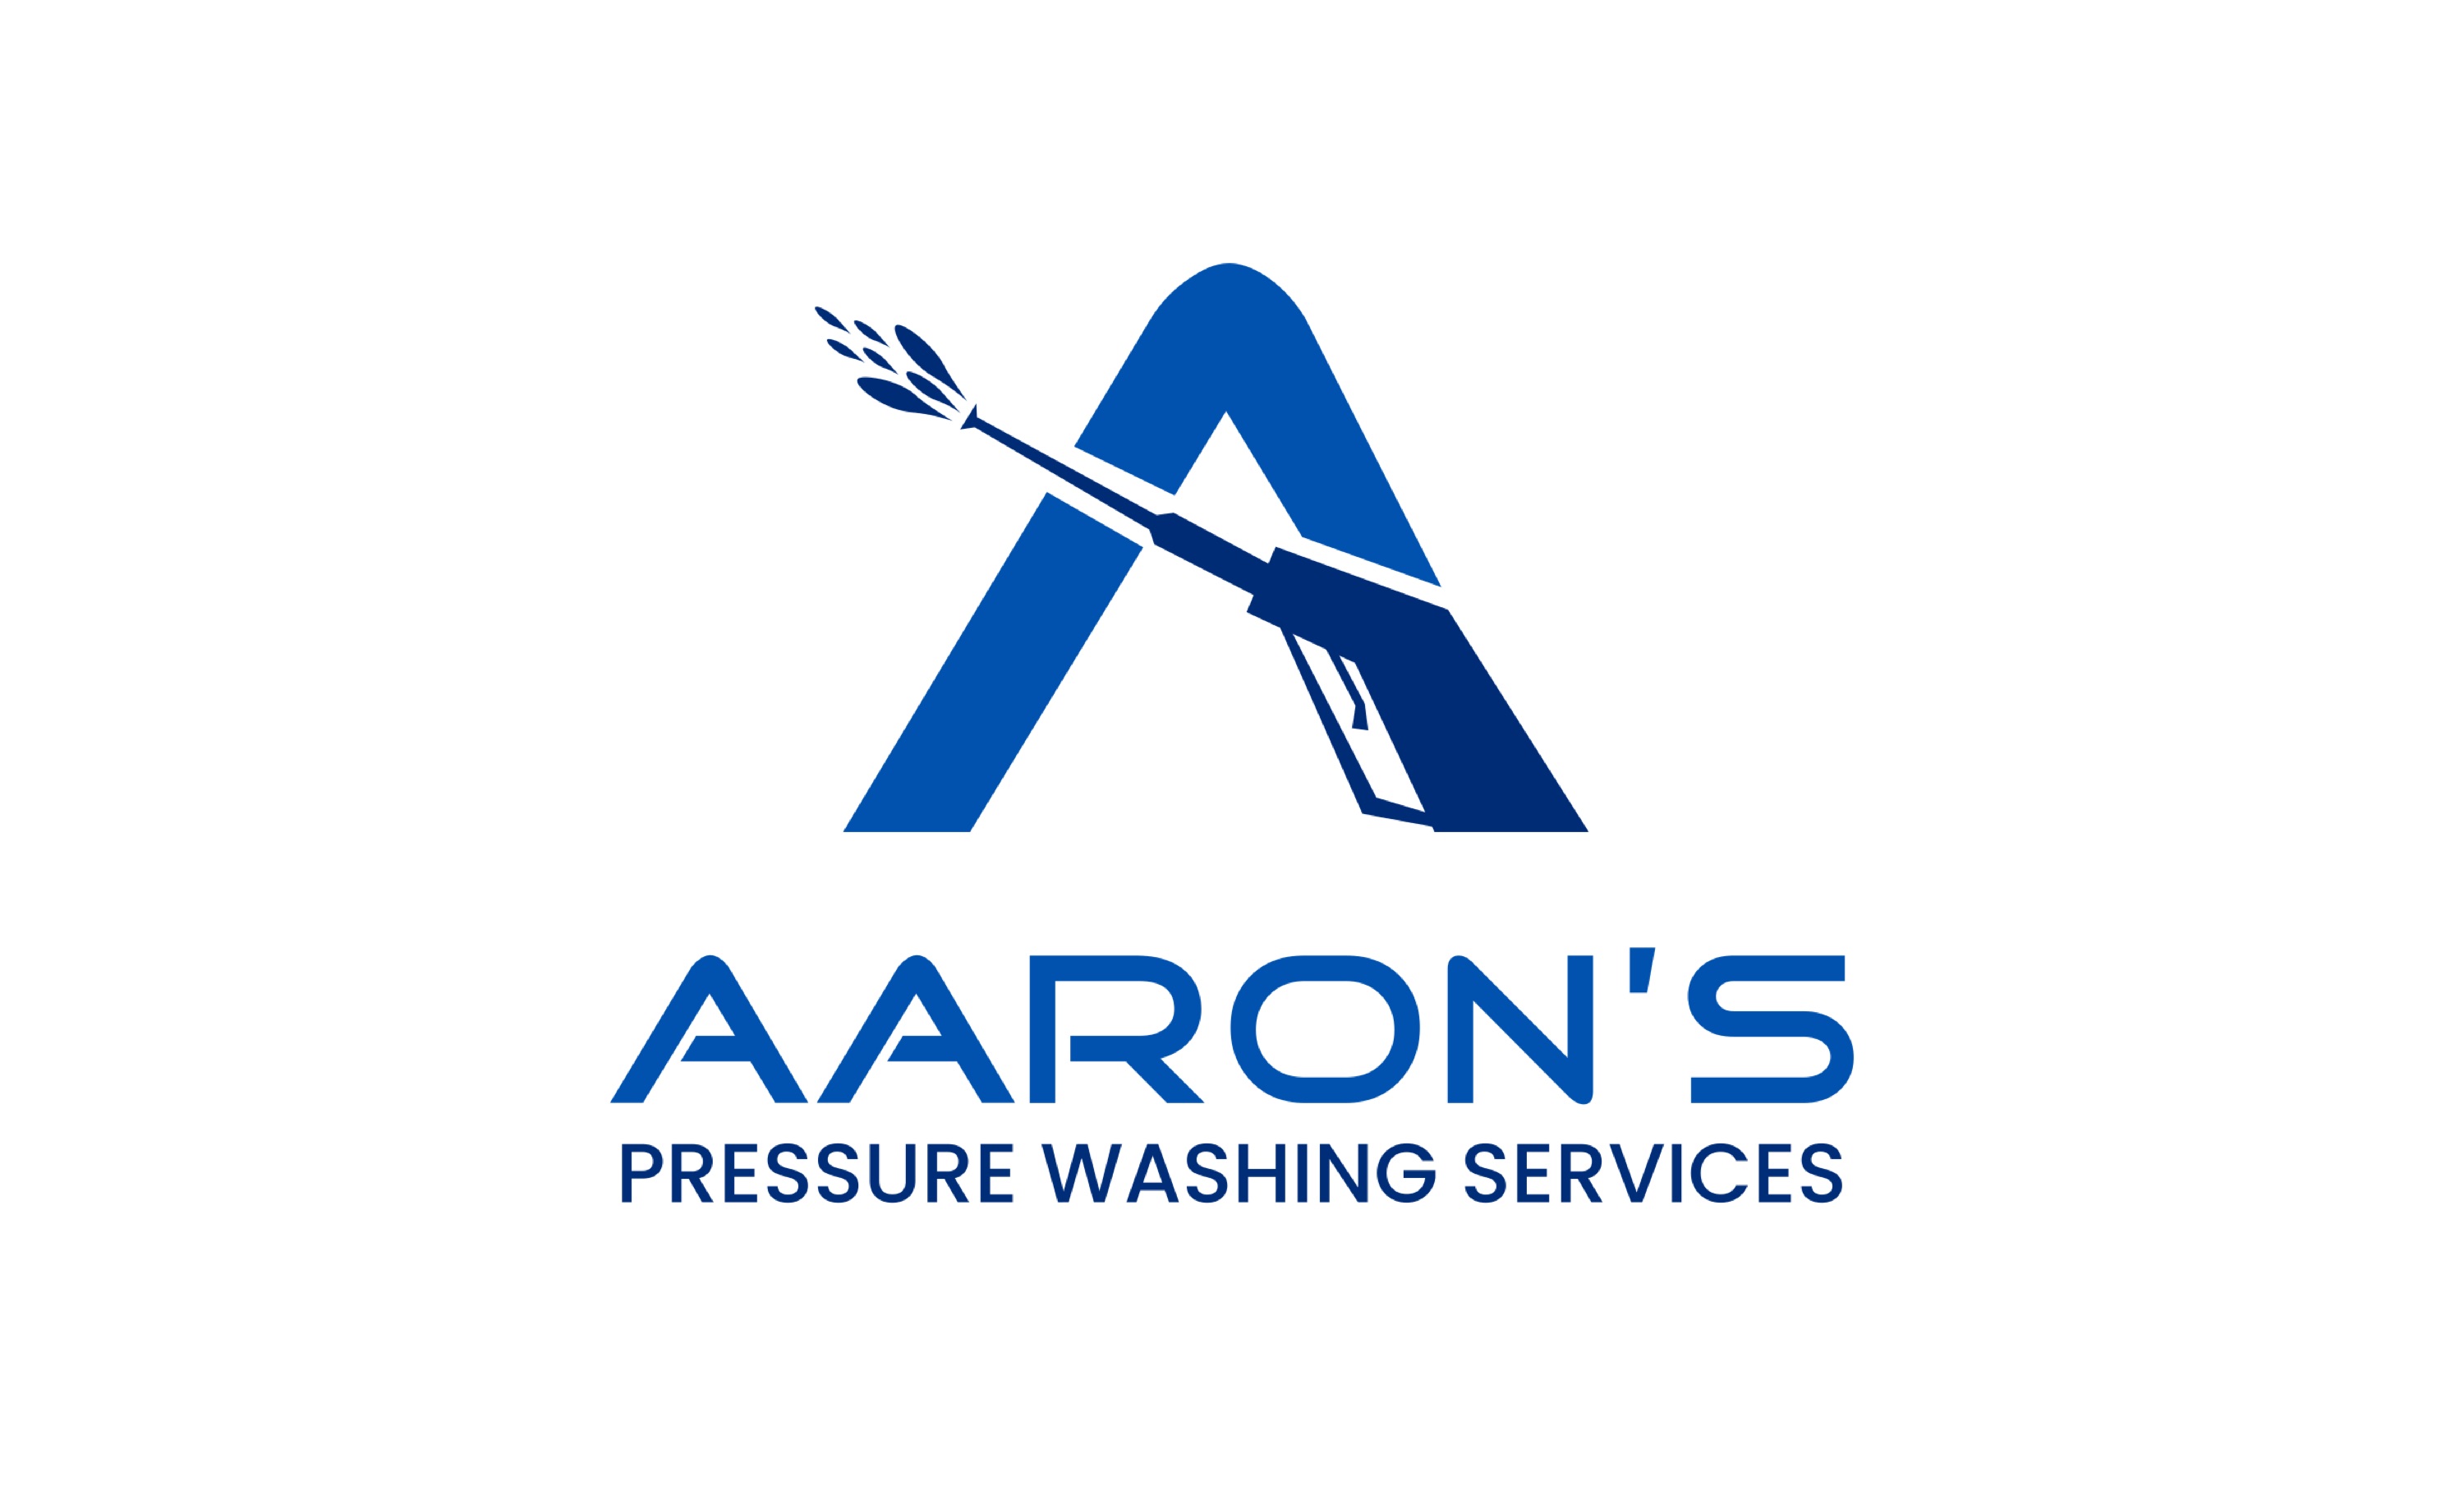 Aarons Pressure Washing Services - Unlicensed Contractor Logo